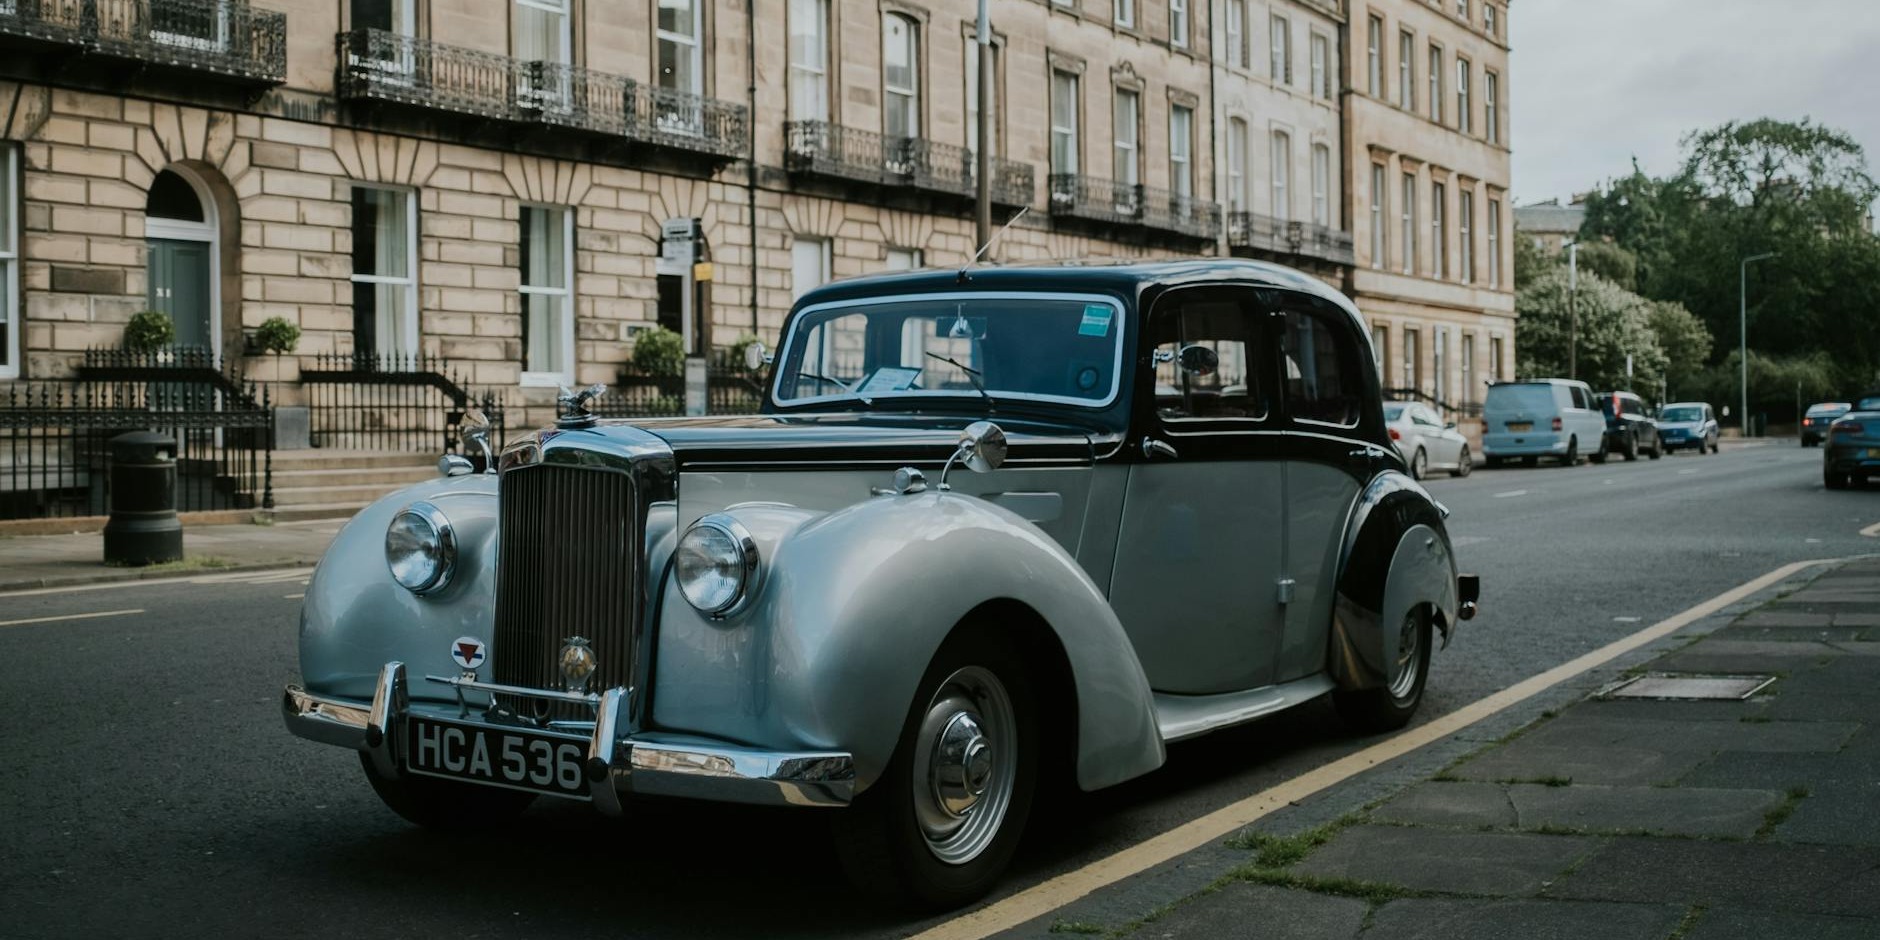 Top Tips for Hiring a Vintage Wedding Car in Manchester